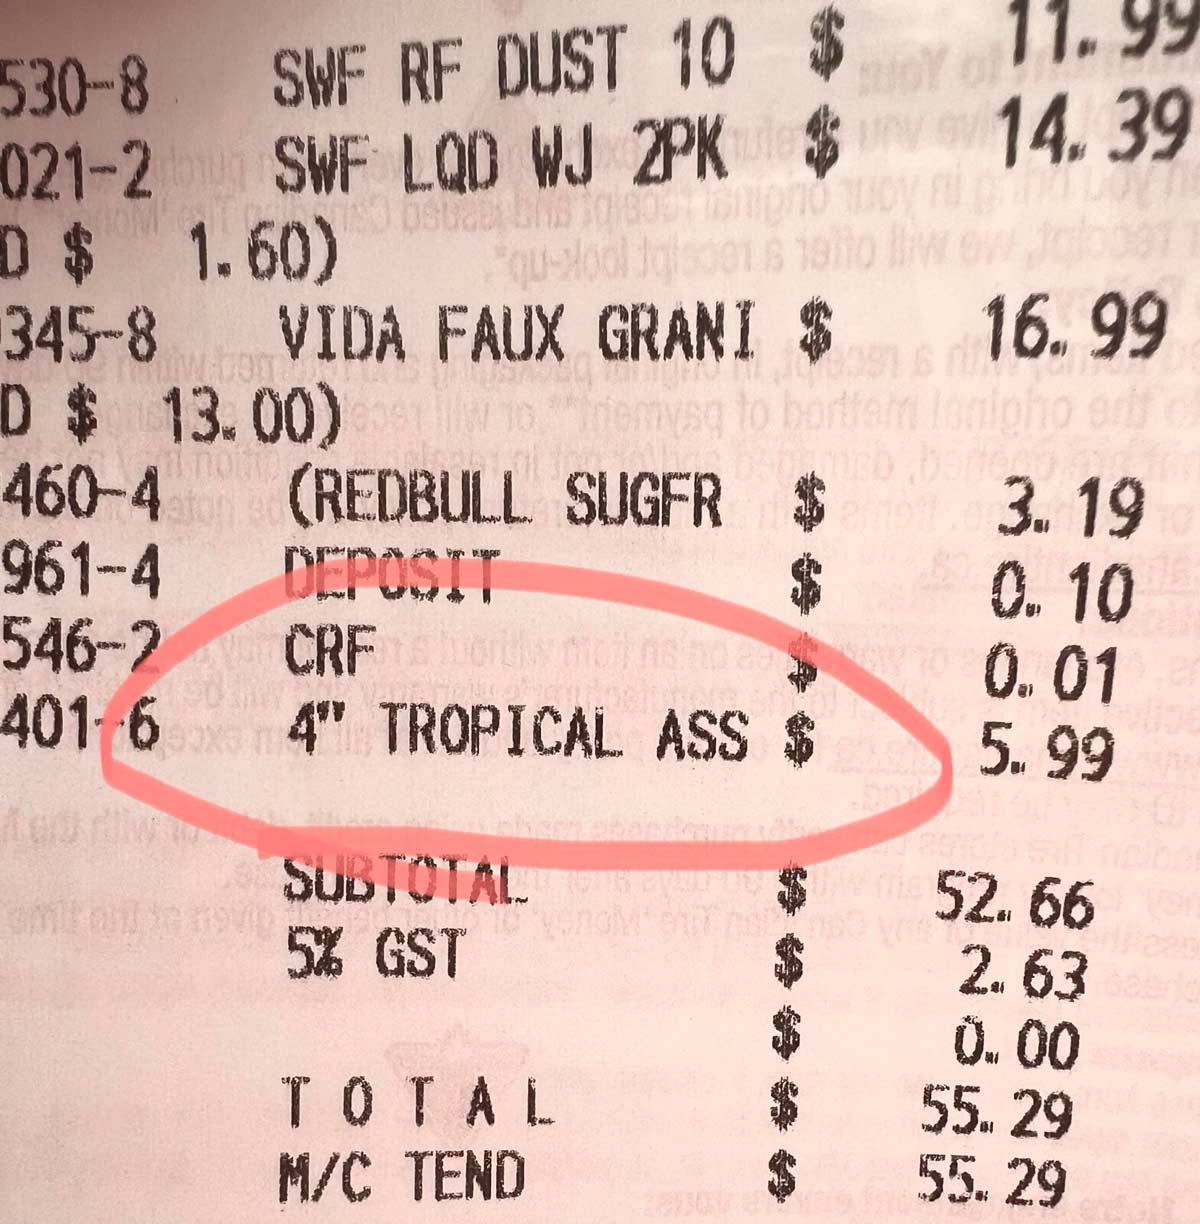 My wife bought a plant at Canadian Tire and this was what it showed up as on the receipt